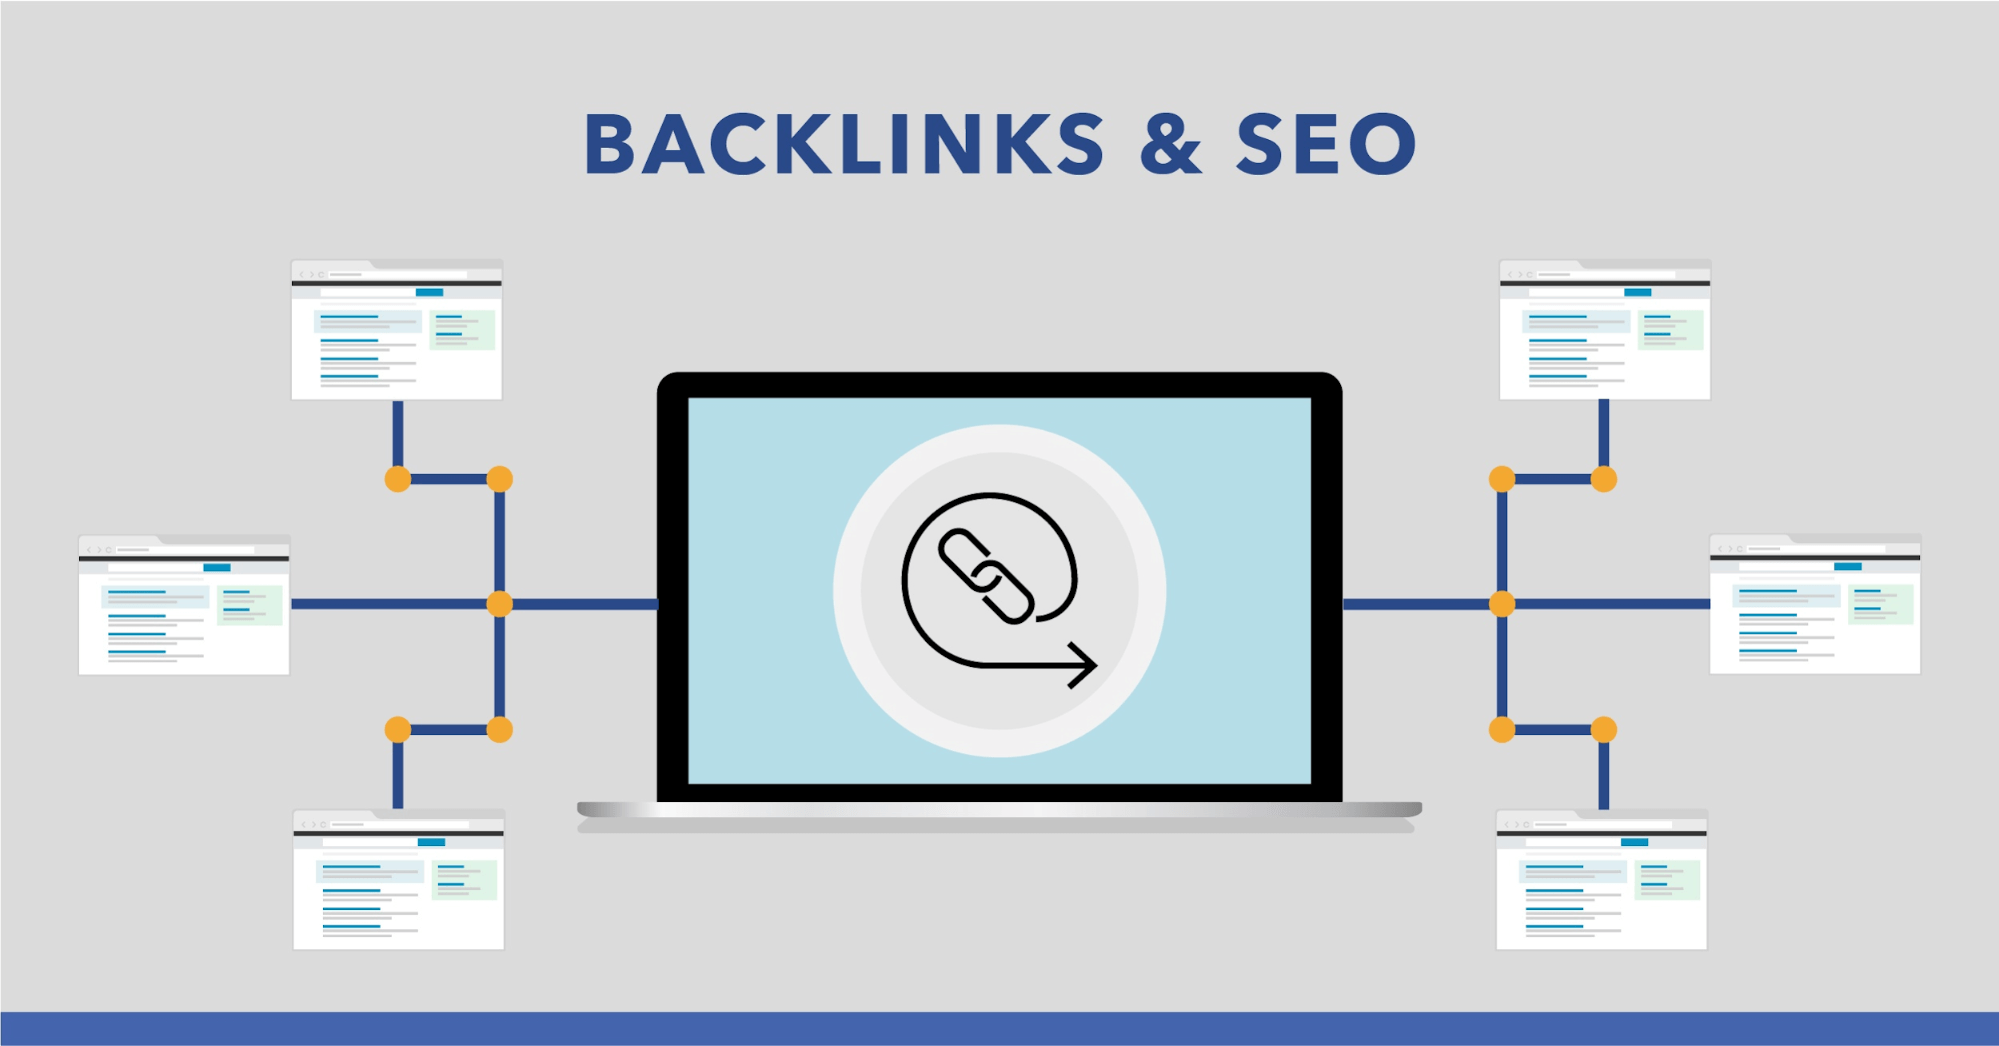 This is why backlinks are important for SEO